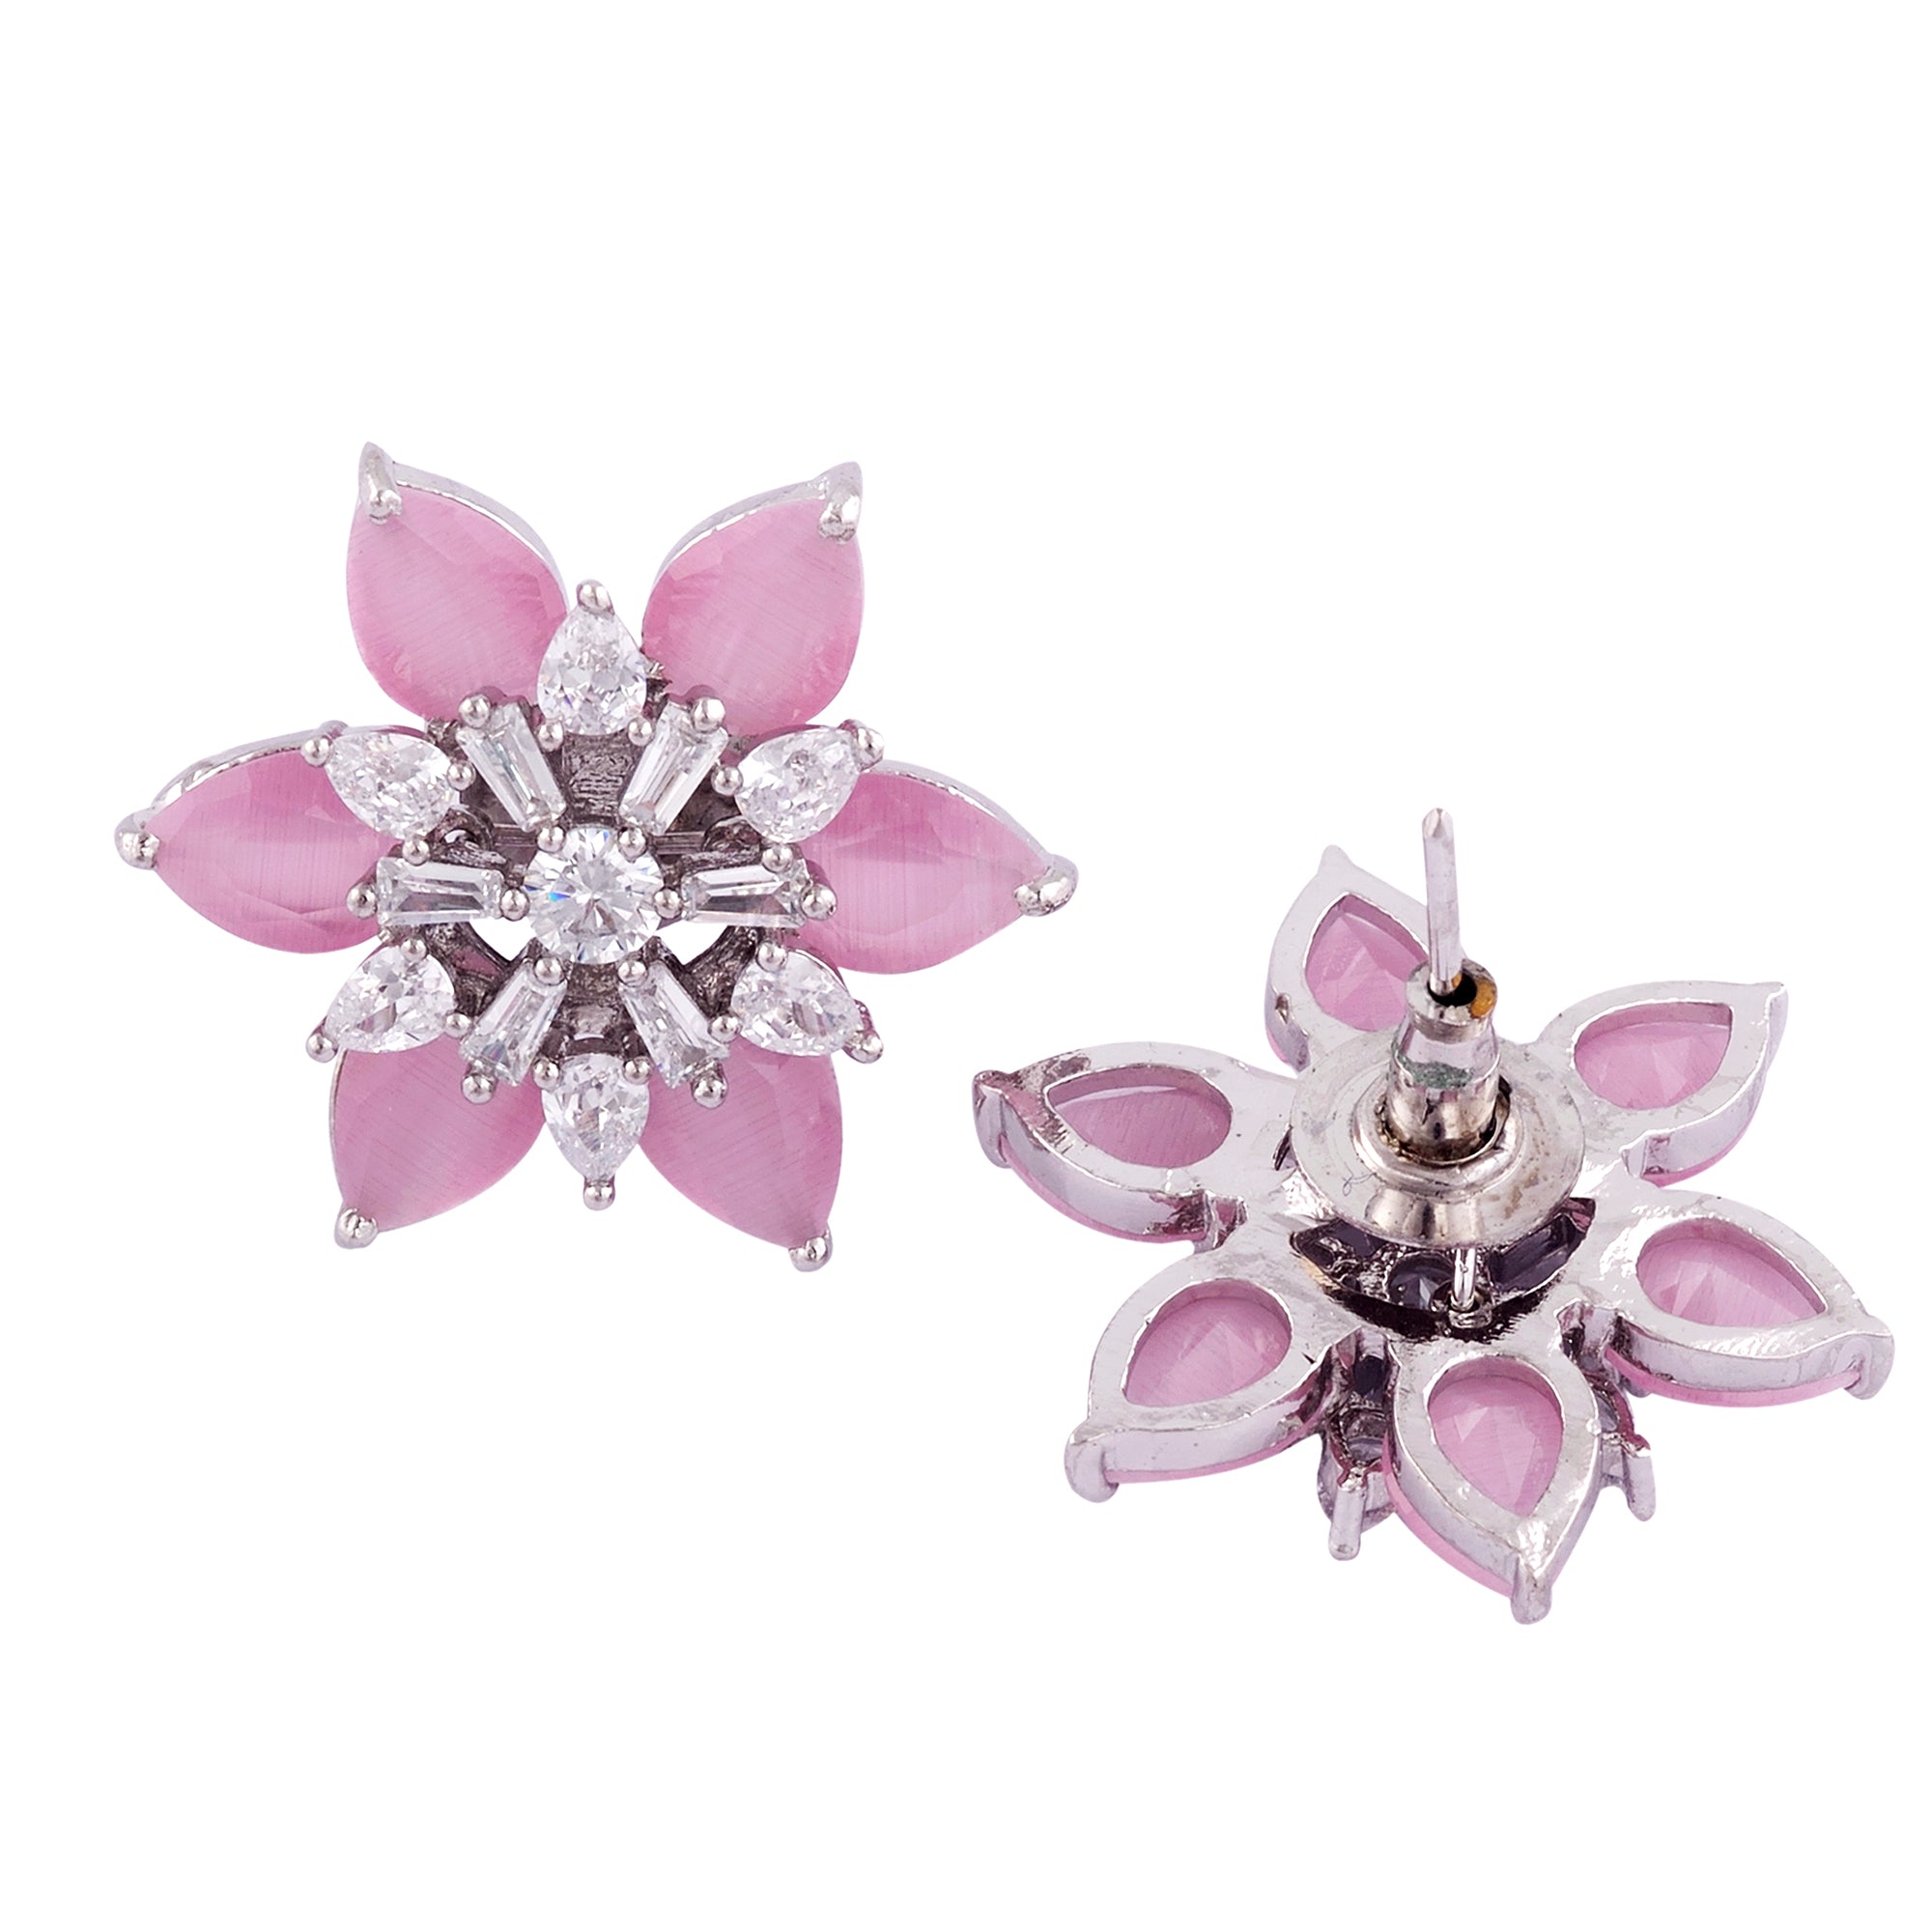 White Rhodium With Pink American Diamond Studded Handcrafted Earrings for Women and Girls - Saraf RS Jewellery